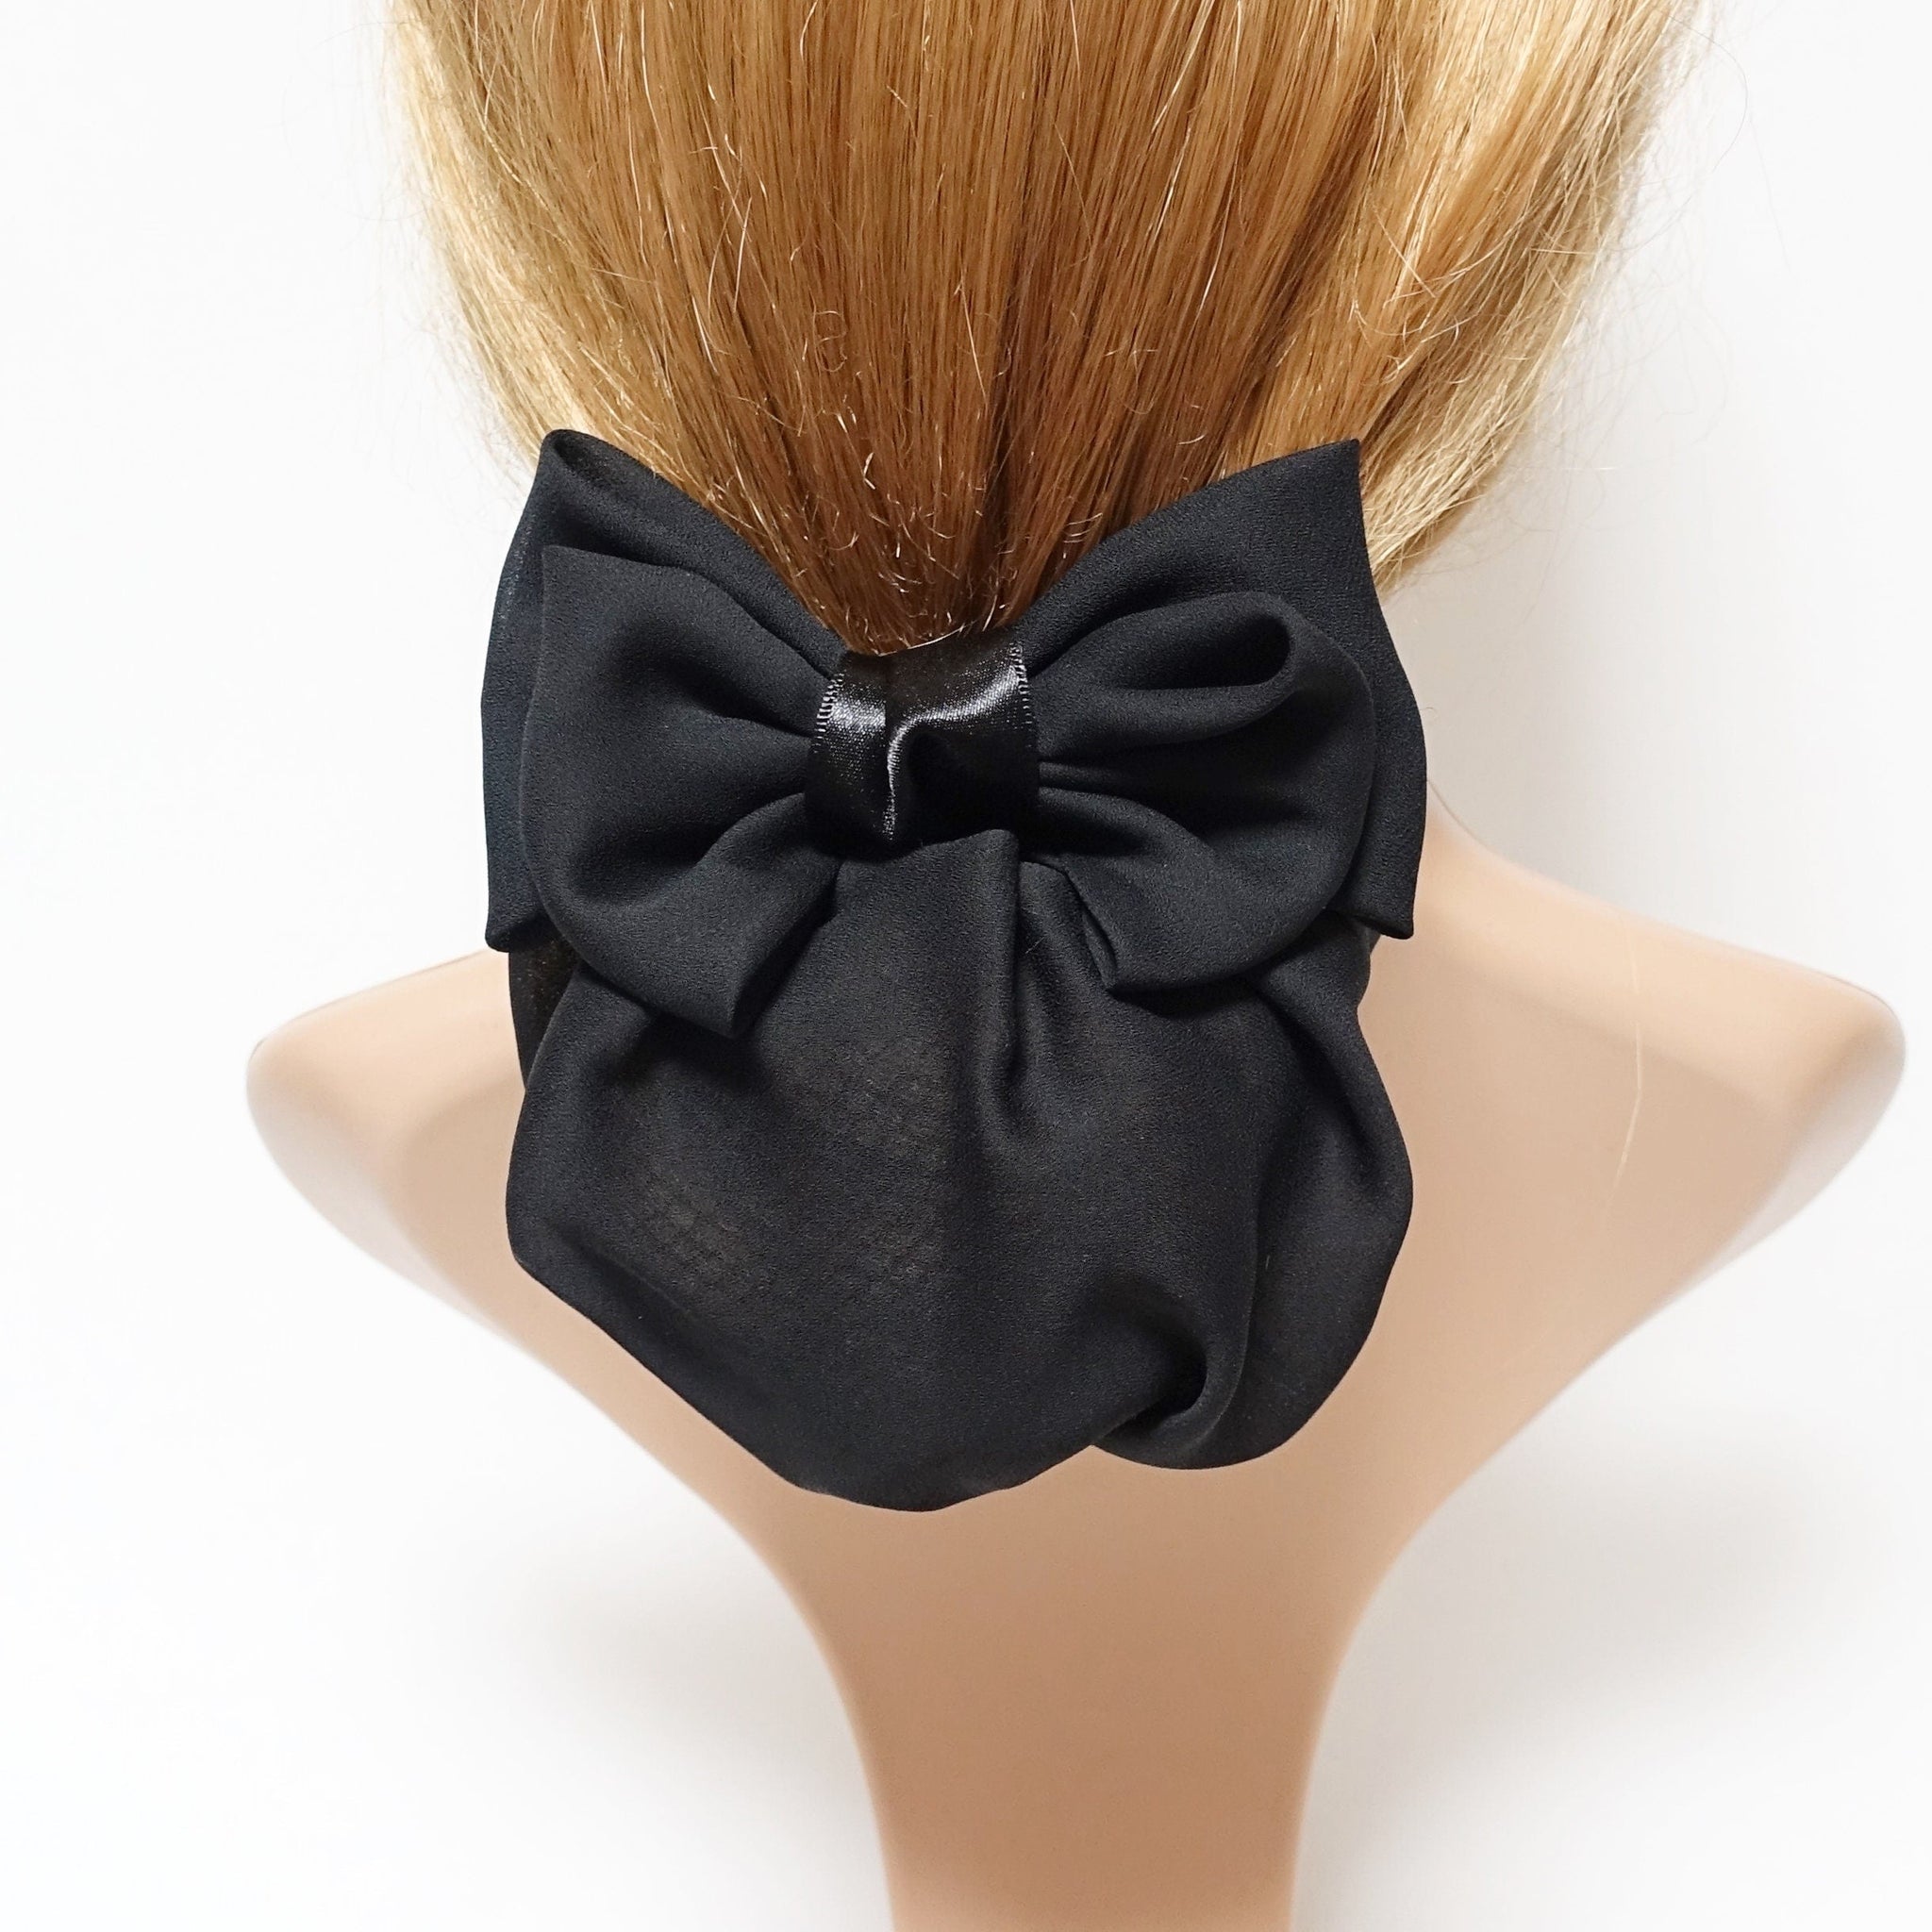 veryshine.com Barrette (Bow) covered snood net professional hair bow french barrette